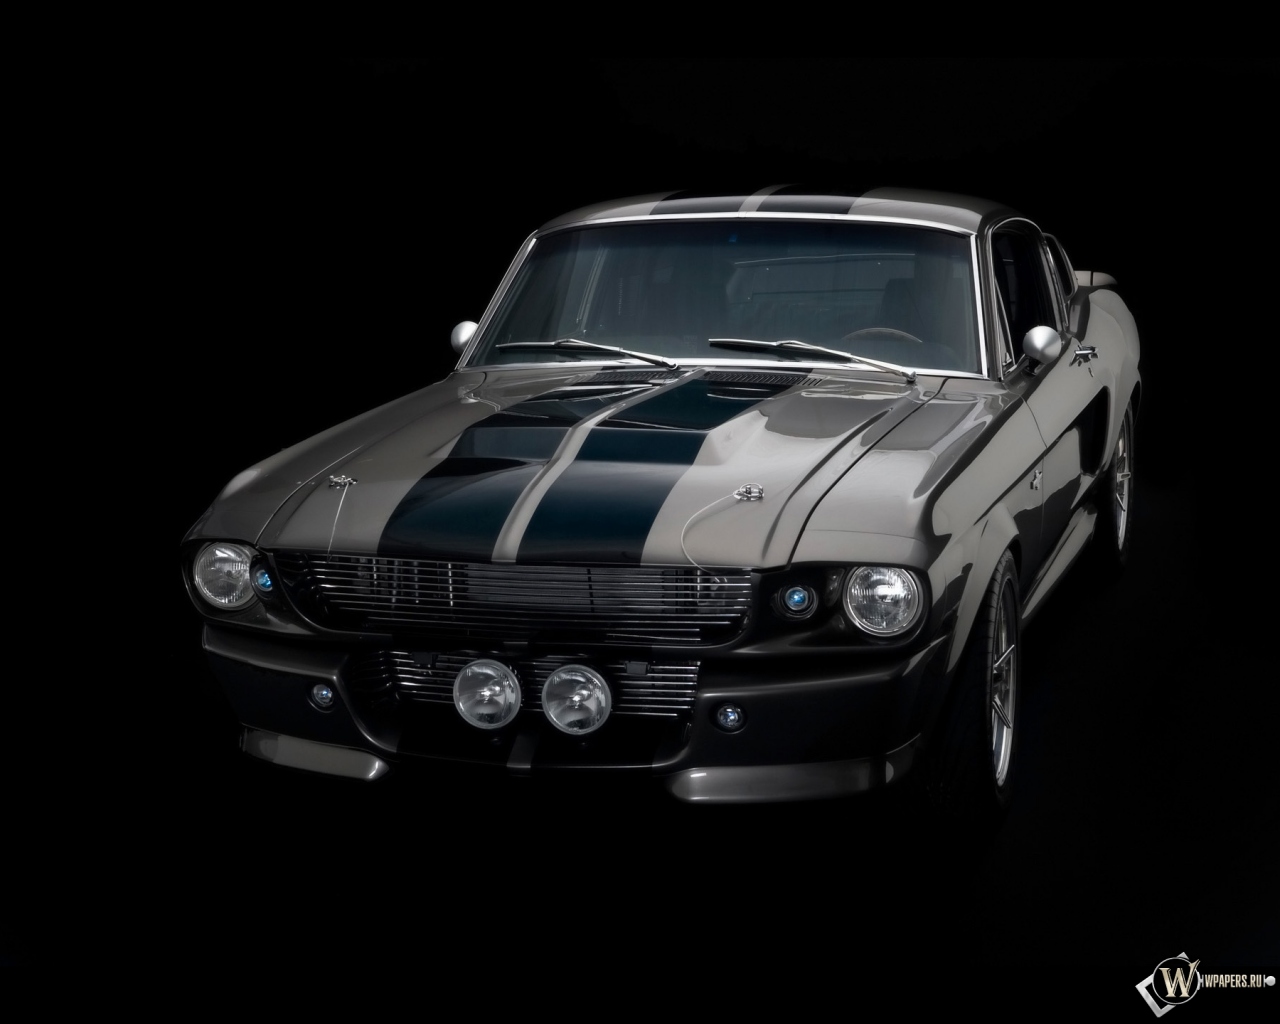 1967-Mustang-Fastback-Gone-in-60-Seconds-Eleanor-Section 1280x1024